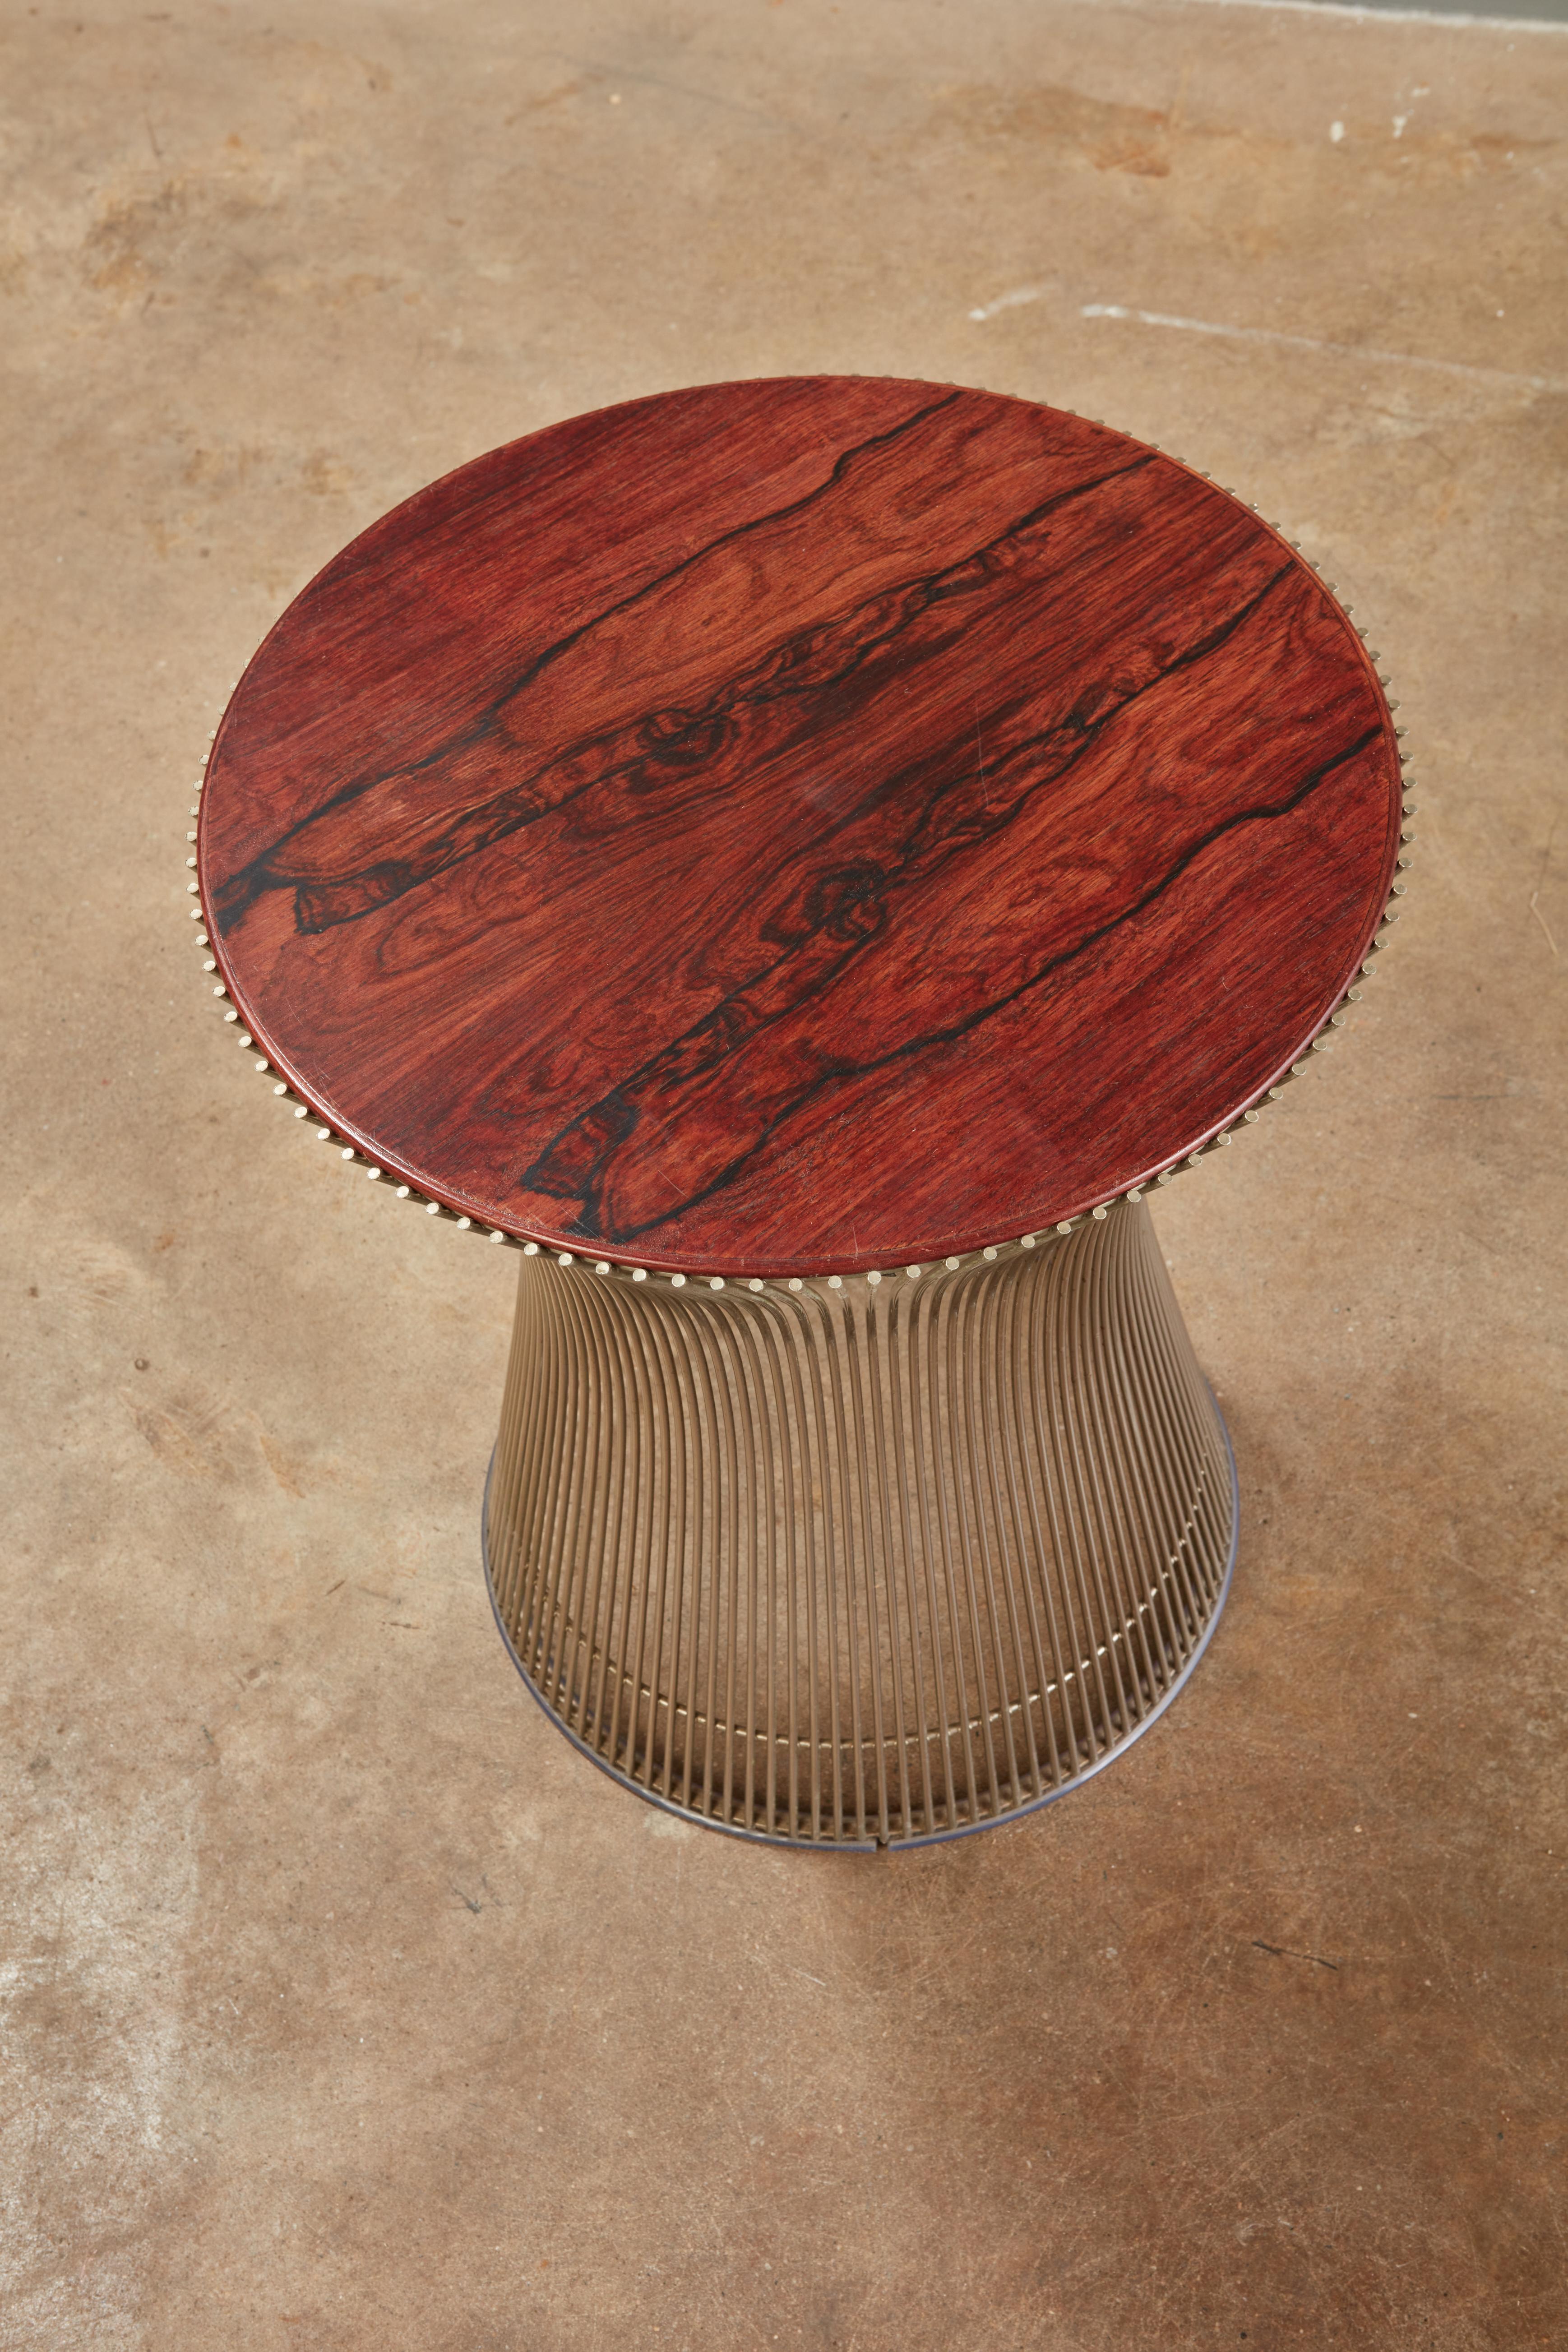 A very handsome rosewood and chrome side table by Warren Platner. The grain is particularly pretty on this original top, and has not been refinished.

This table came from the estate of the Director of the Boston Knoll showroom in the 1960s/70s.